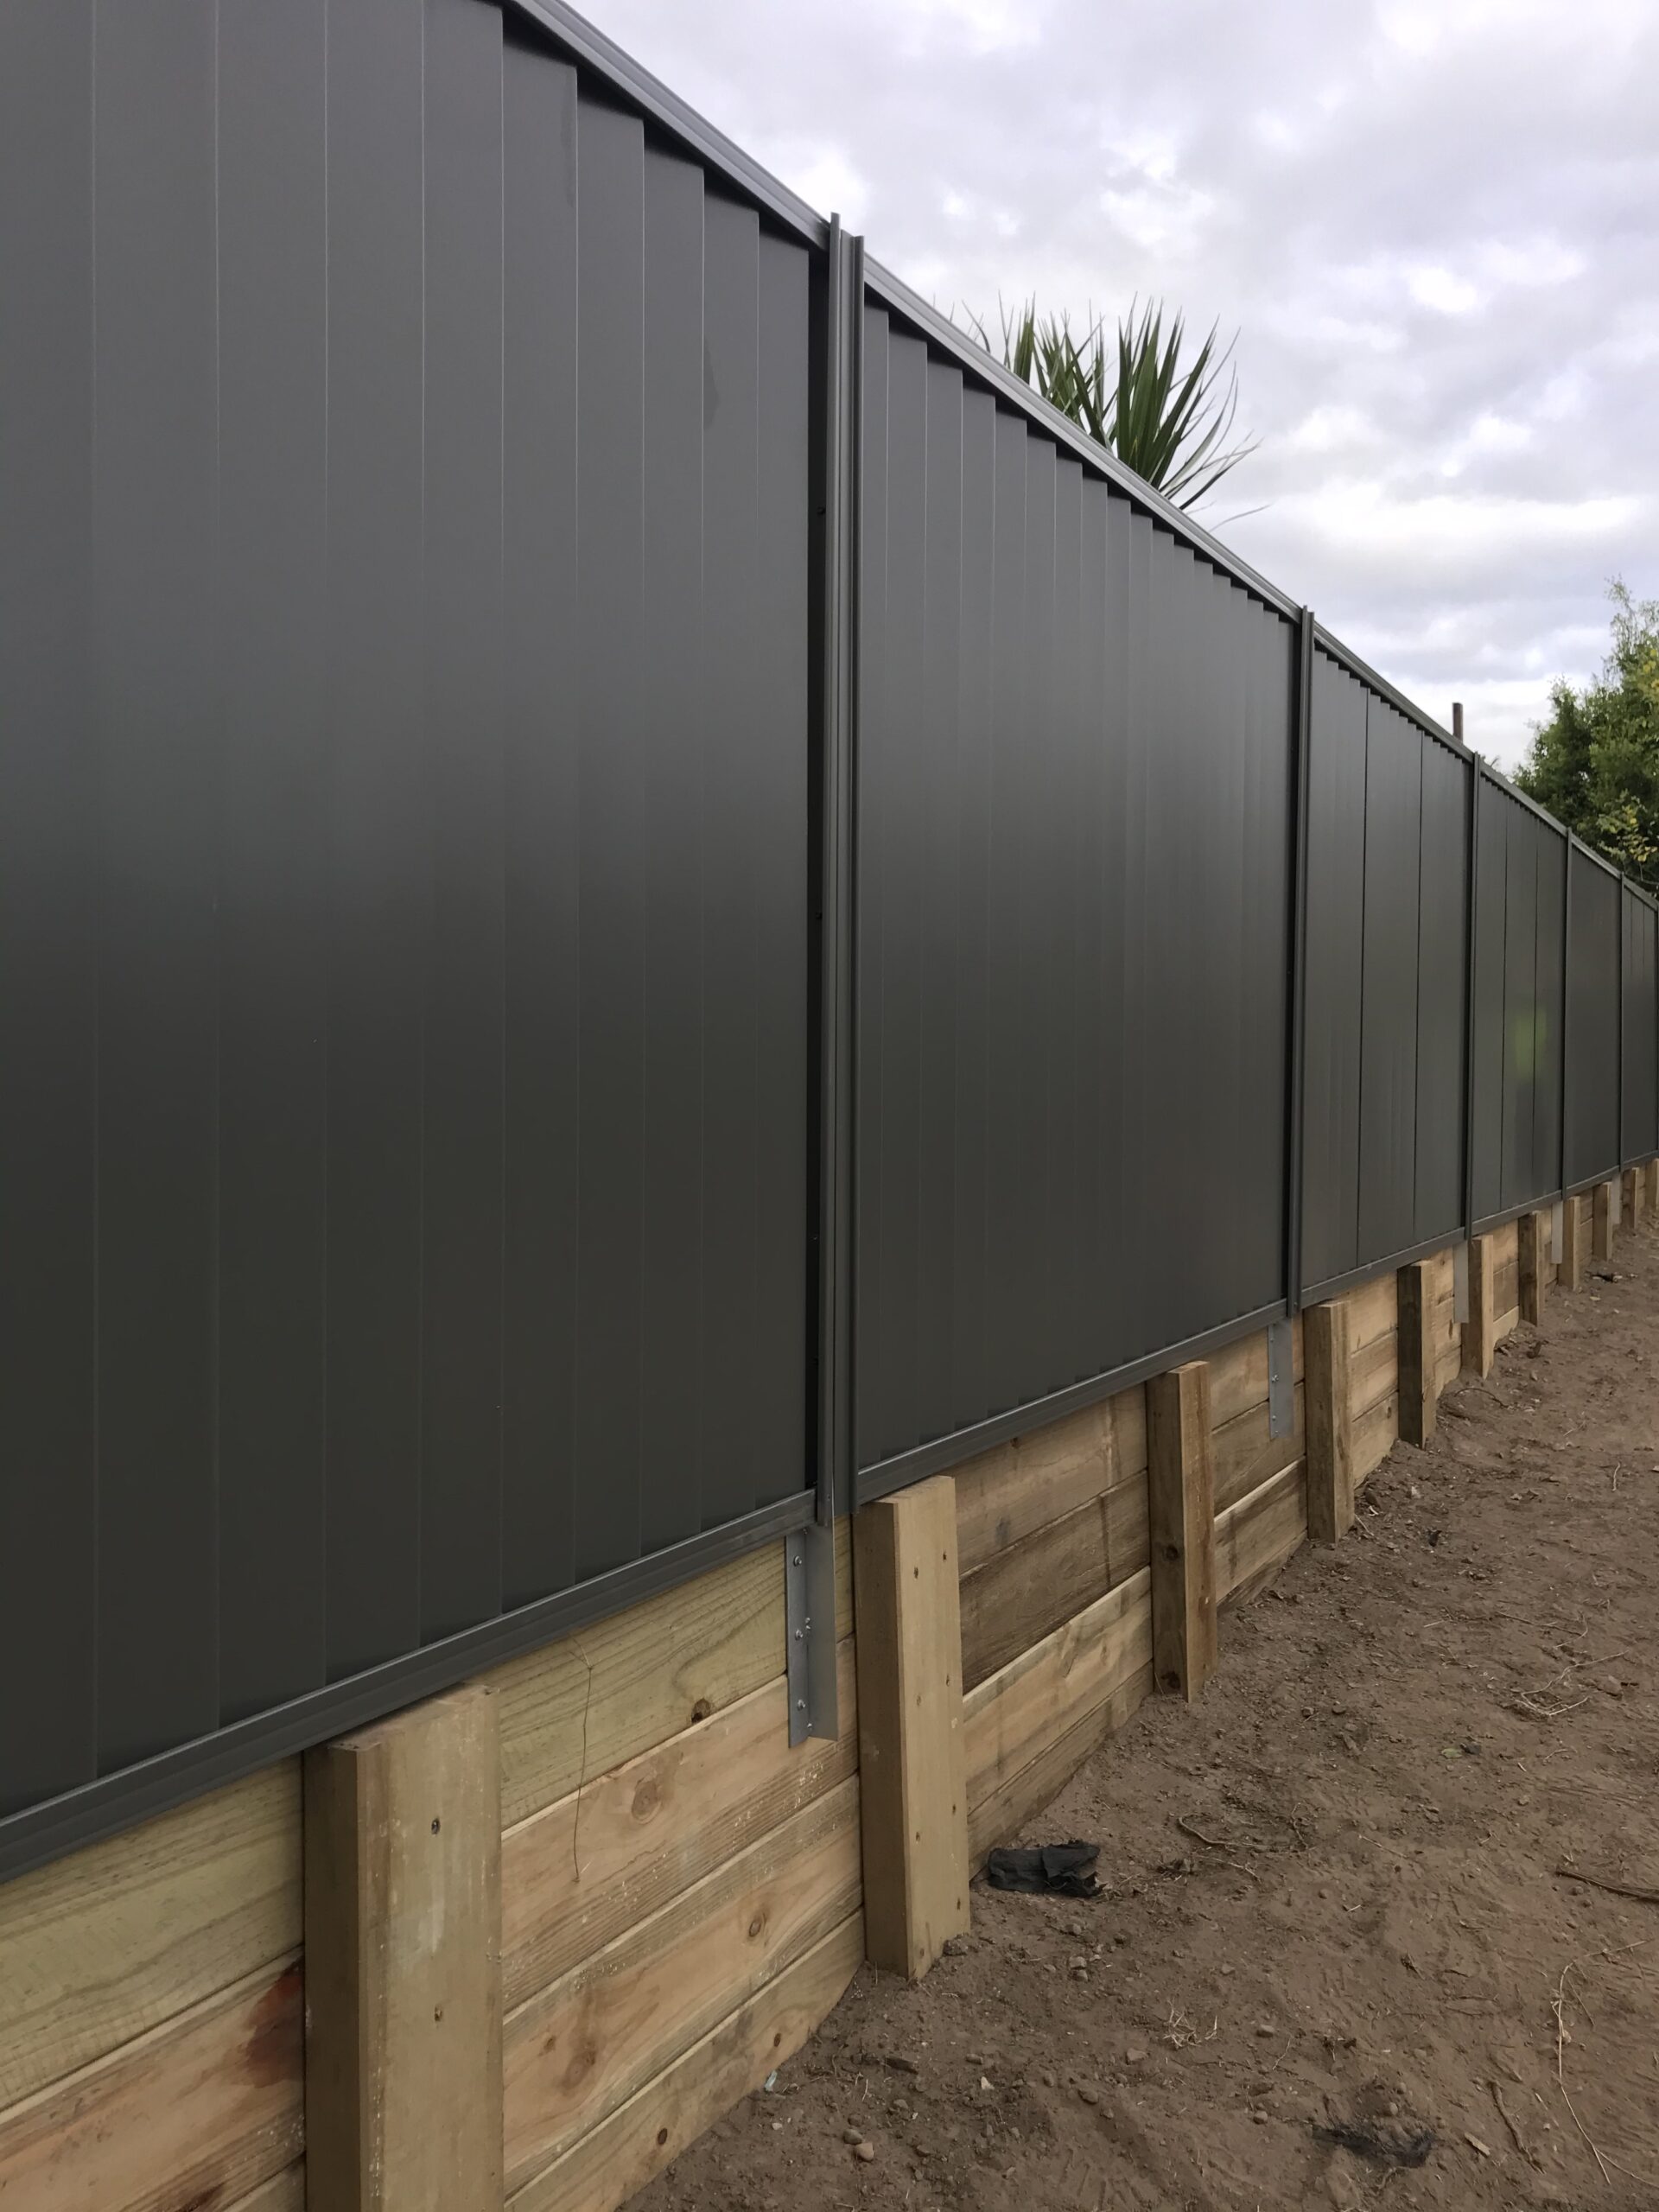 Rycan Maintenance Colorbond Fence and Timber Retaining Wall Installation Brisbane